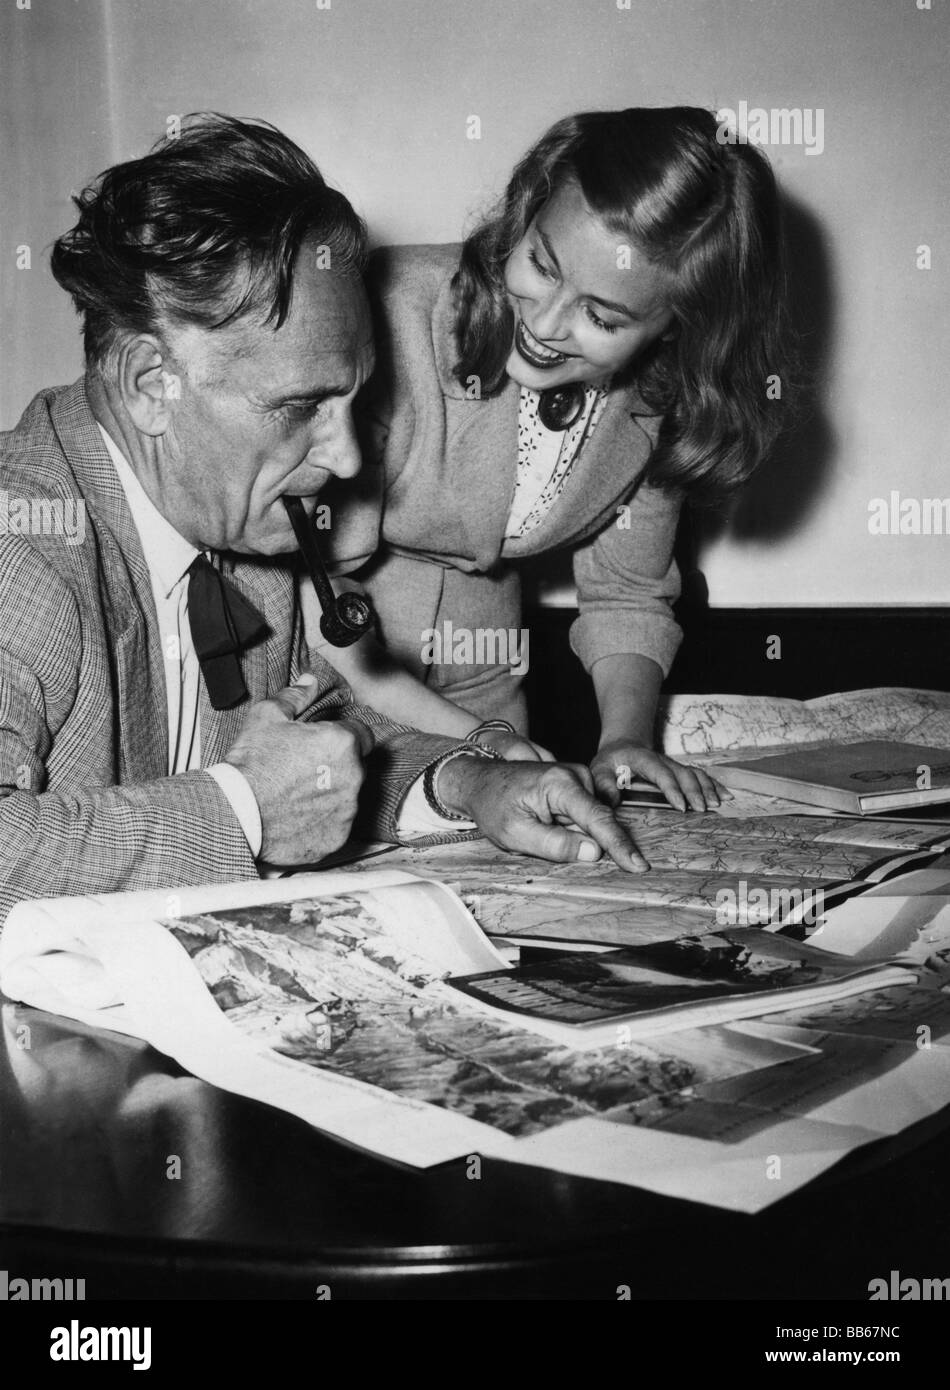 Trenker, Luis, 4.10.1892 - 12.4.1990, South Tyrolean actor, author / writer, half length, with Marianne Hold, Stock Photo